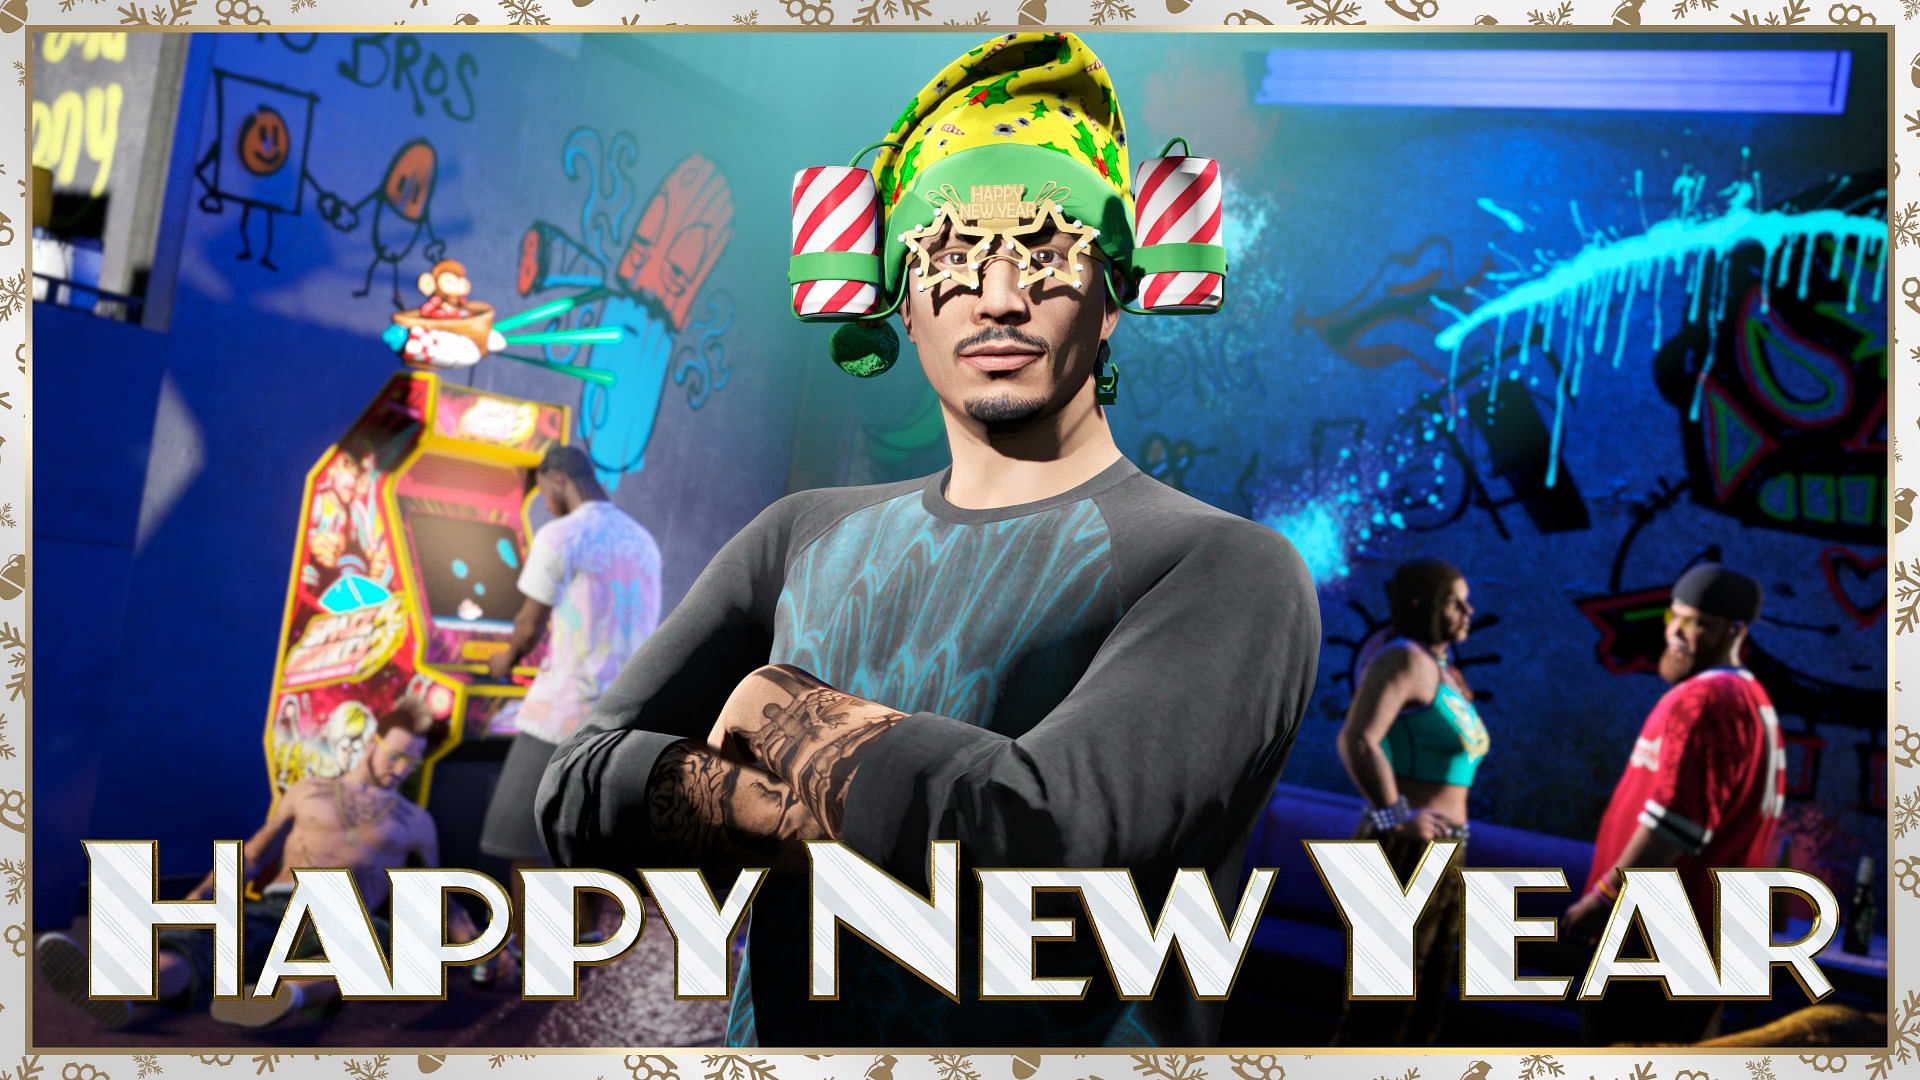 There are some New Years stuff that players will get soon (Image via Rockstar Games)